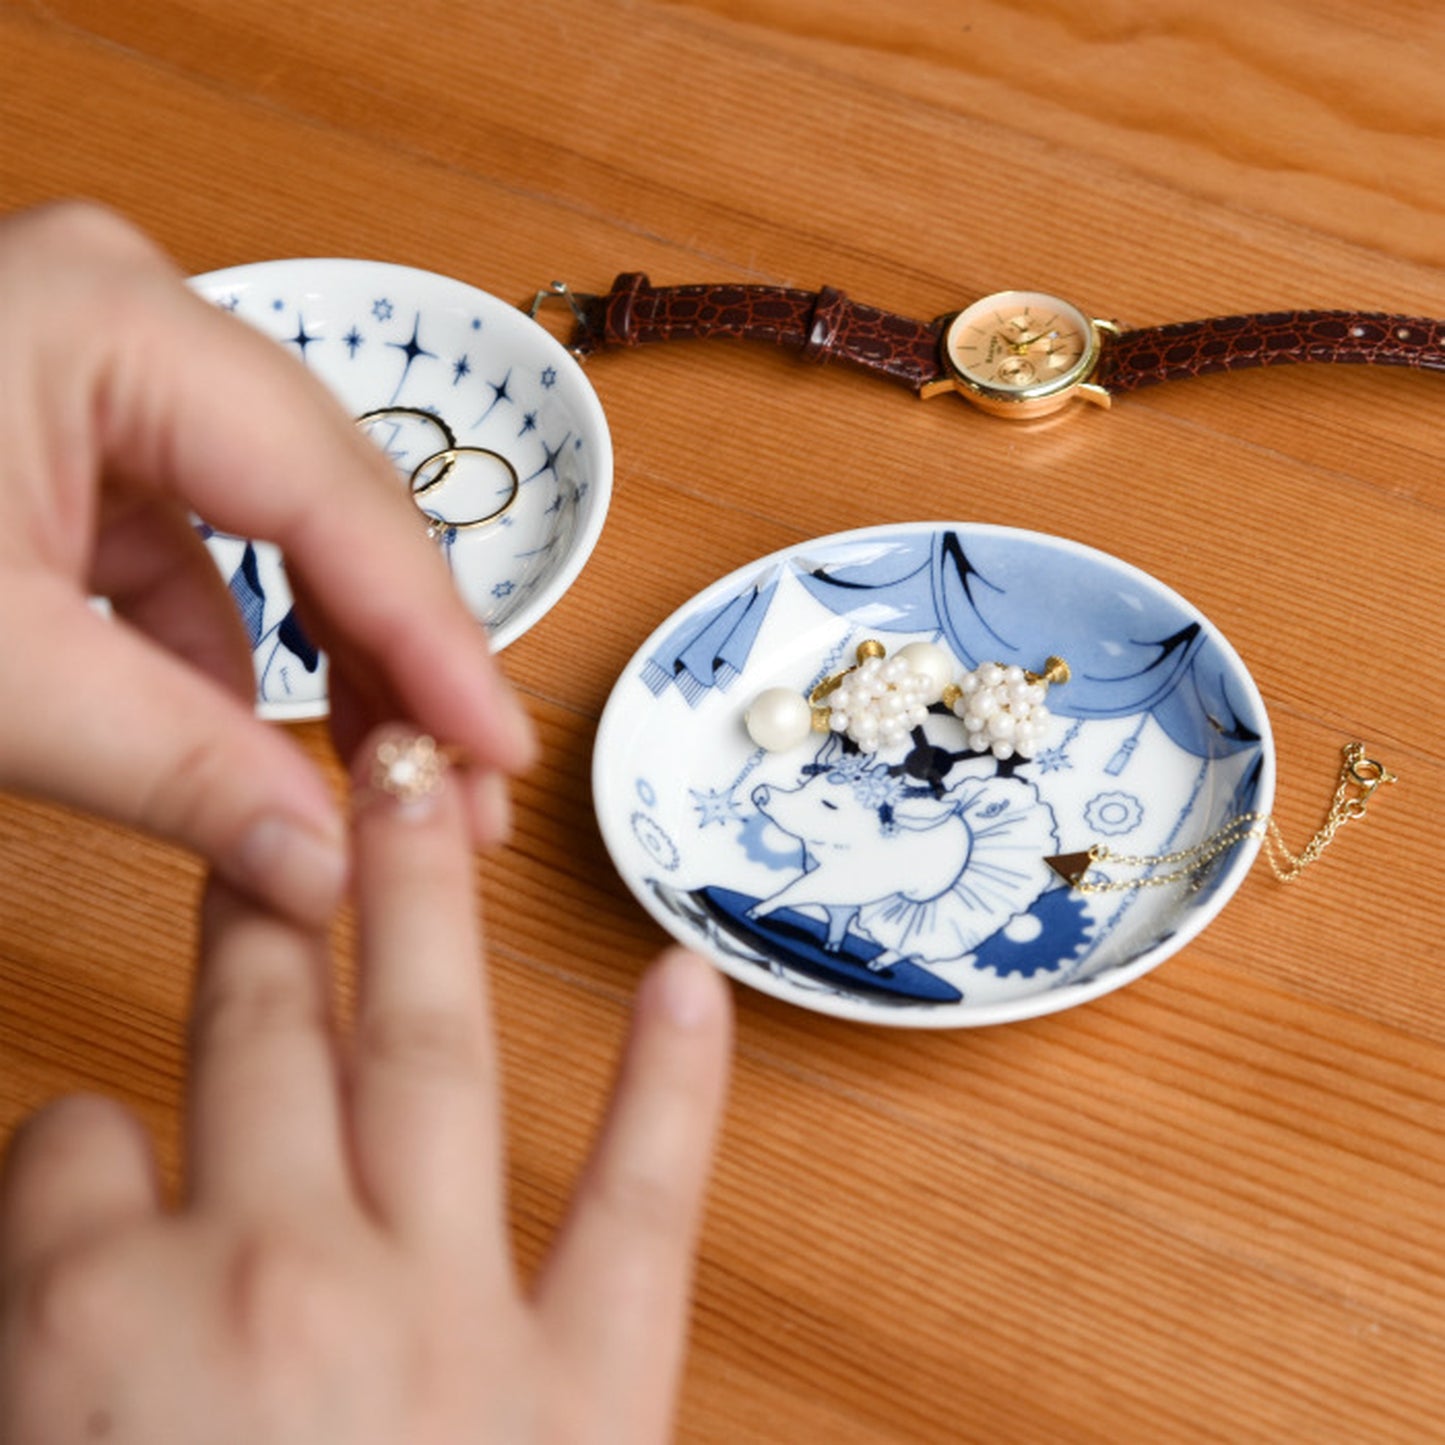 [Hasami ware] [natural69] [bean plate] mame tableware Scandinavian style small plate Soy sauce plate Hand salt plate